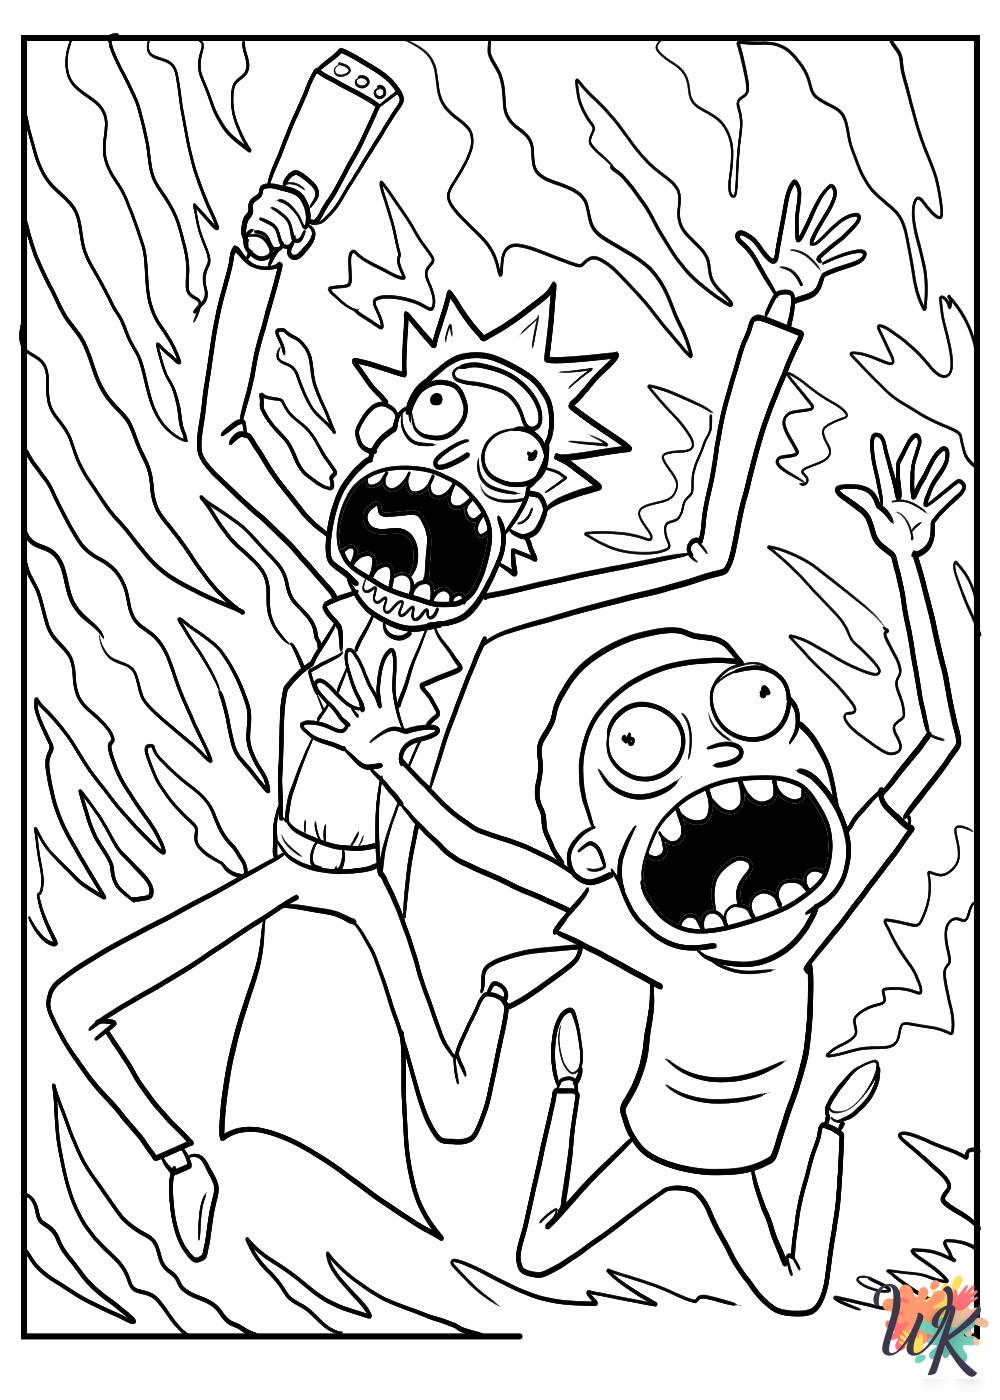 Rick and Morty ornament coloring pages